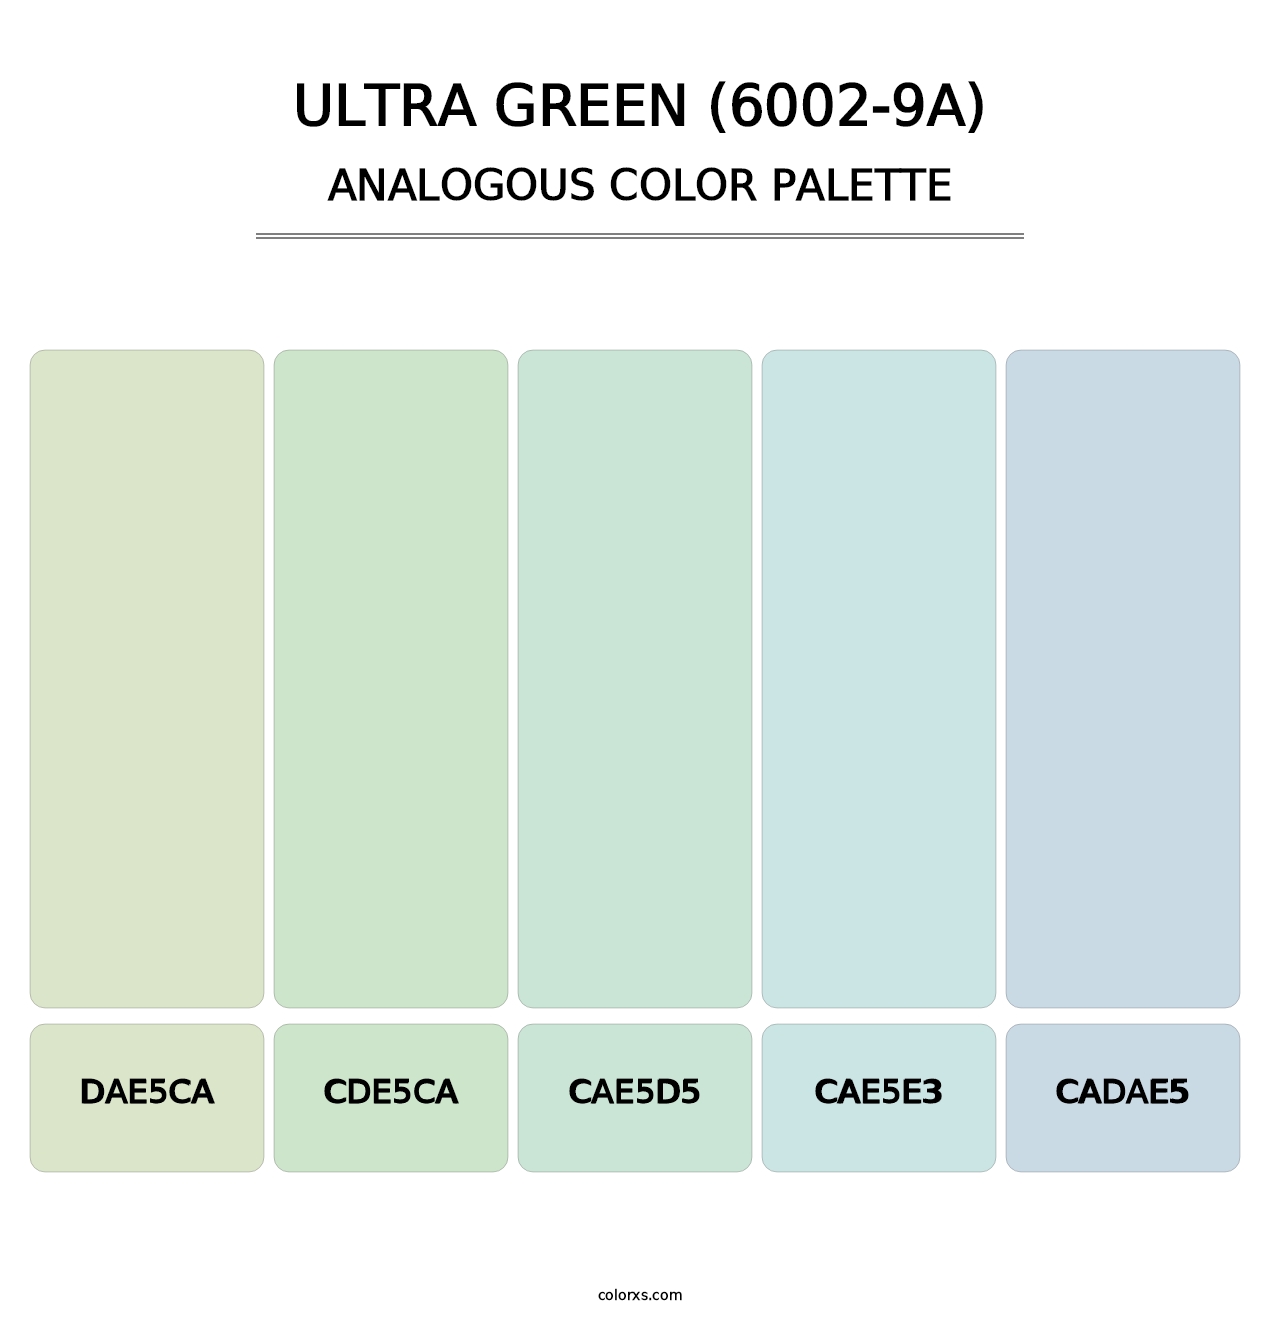 Ultra Green (6002-9A) - Analogous Color Palette